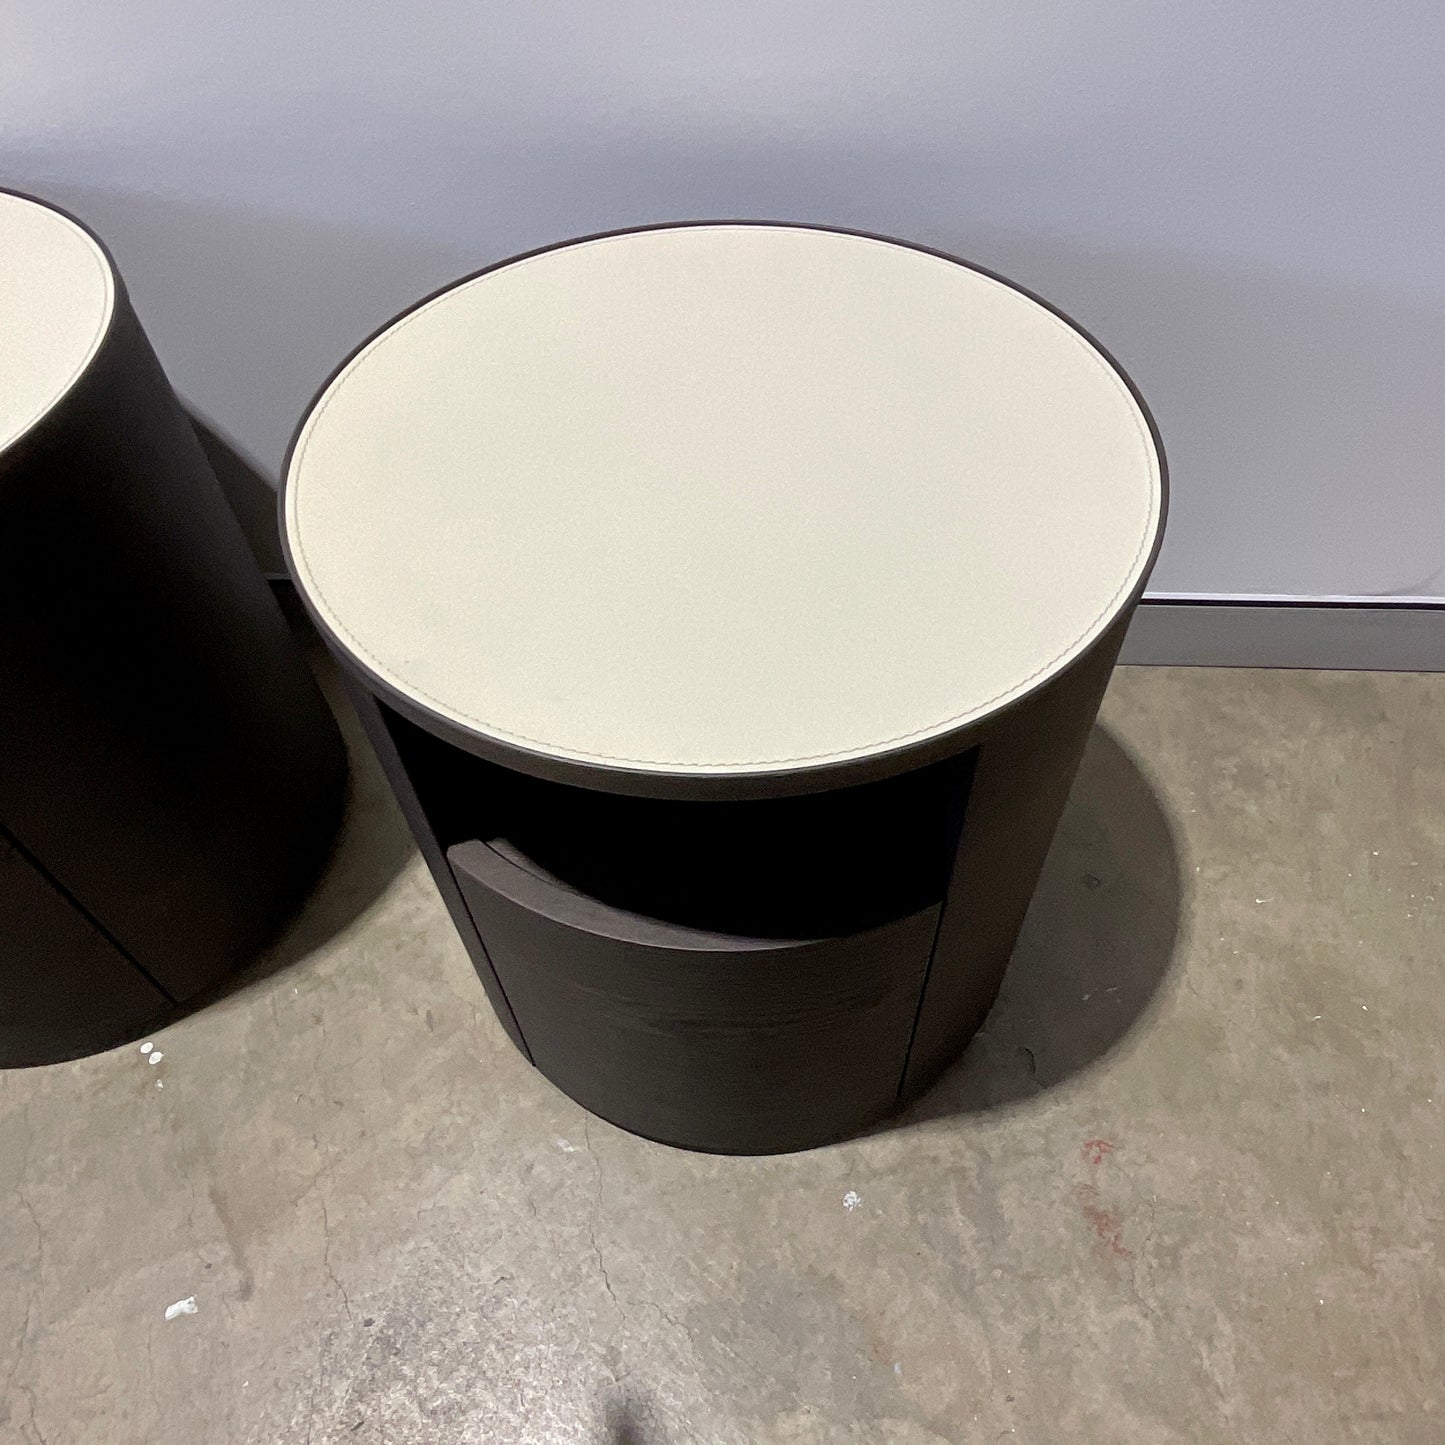 PAIR Onda Bedside Tables by Paolo Piva for Poliform